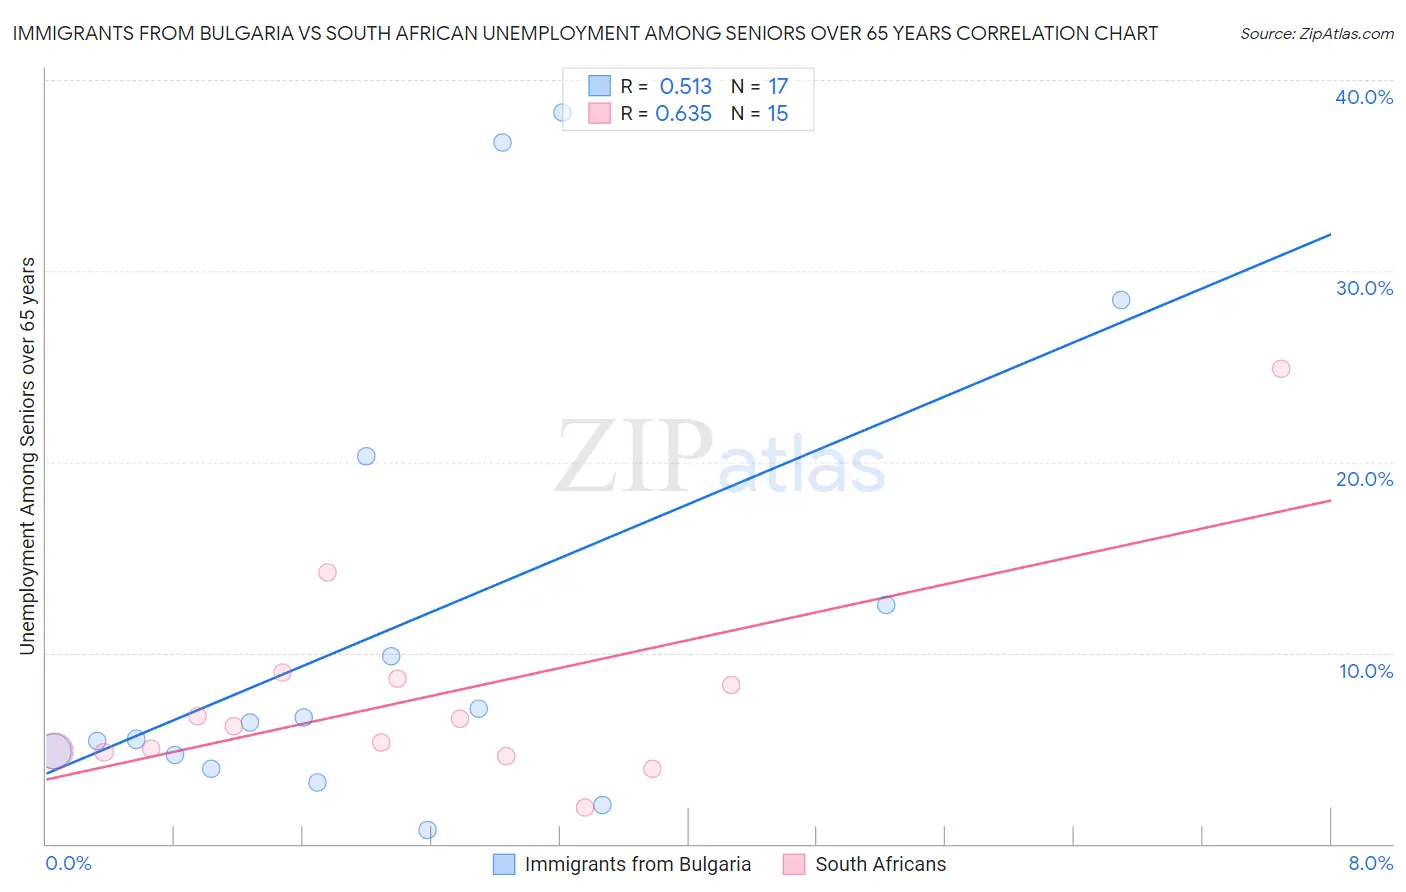 Immigrants from Bulgaria vs South African Unemployment Among Seniors over 65 years